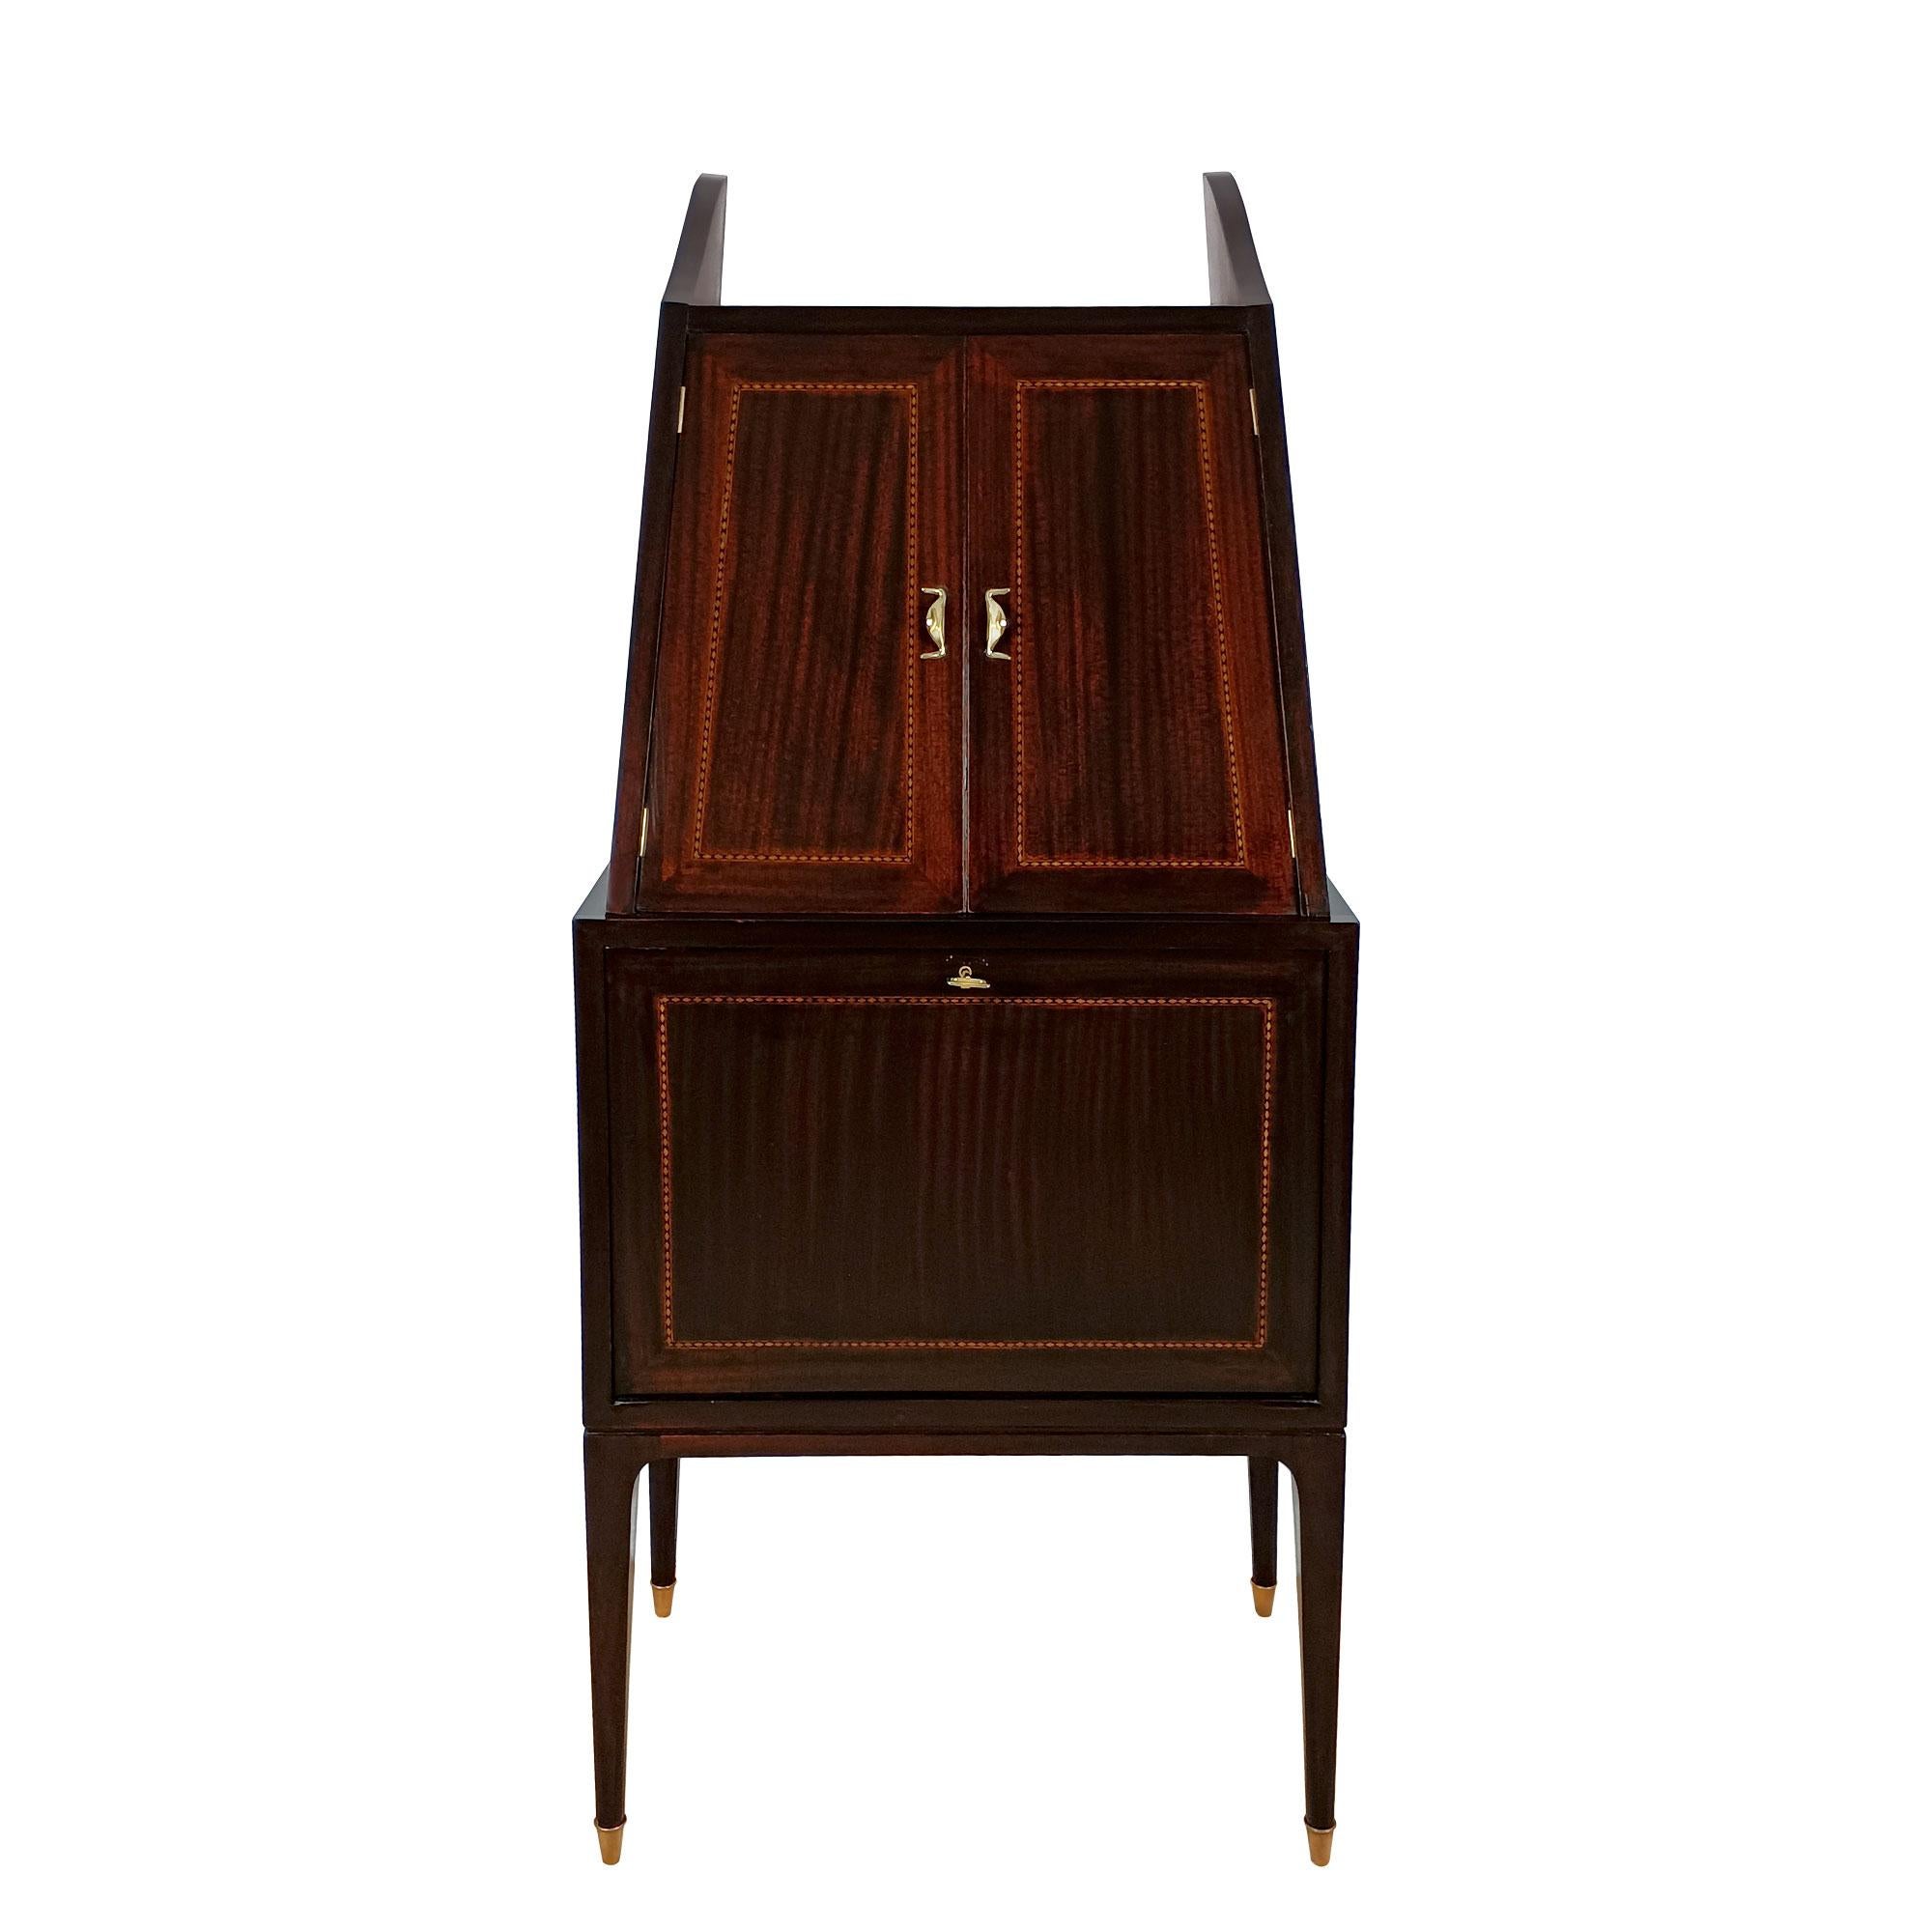 Dry bar, wood with mahogany veneer, decorated with a maple and ebony marquetry border, opening on two maple compartments. Polished brass handles and feet.
Italy circa 1940